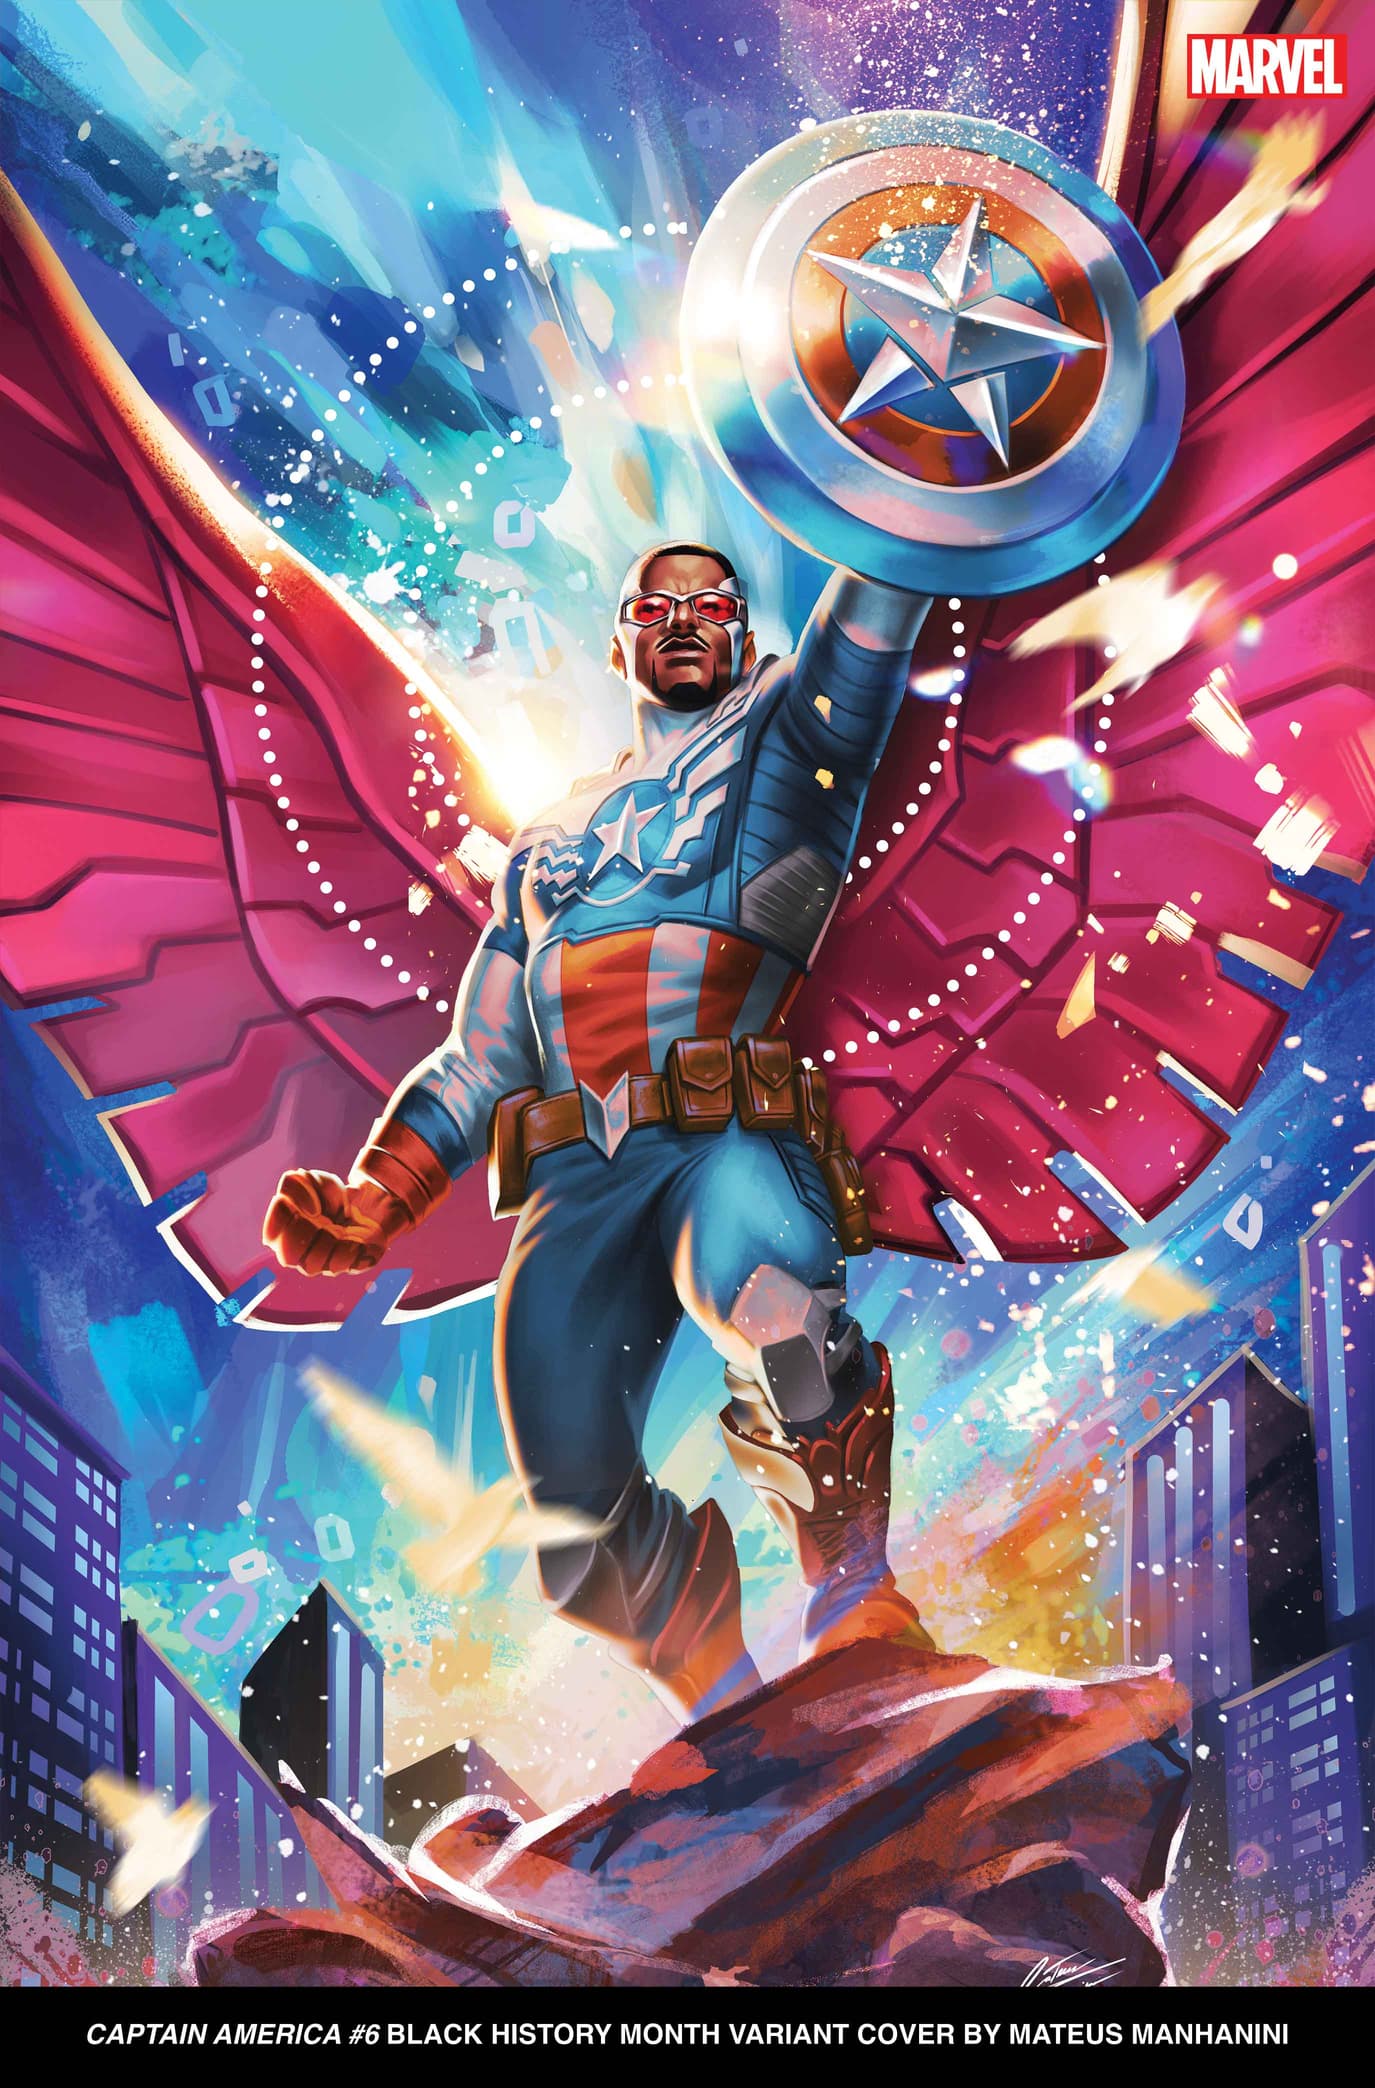 CAPTAIN AMERICA #6 Black History Month Variant Cover by Mateus Manhanini